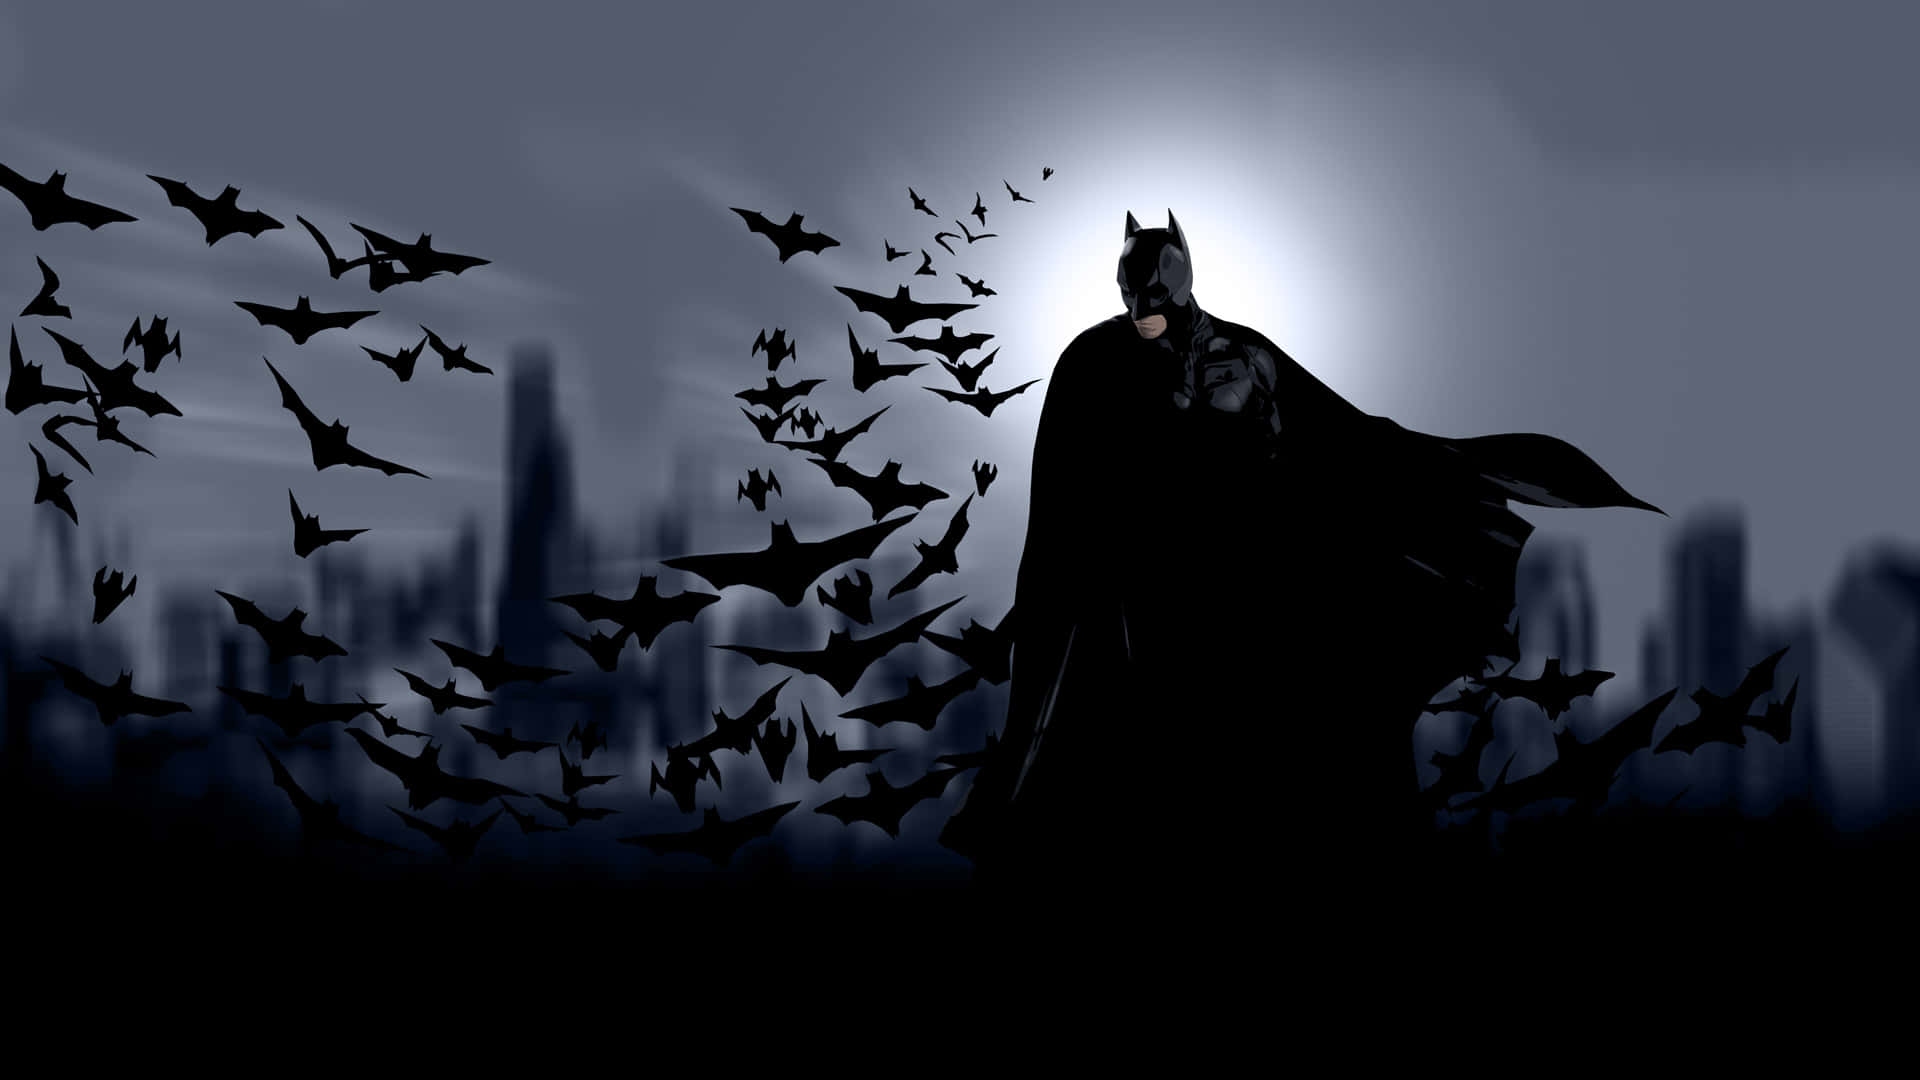 1. Legendary​ Superhero Cool Batman Coming To The Rescue Background